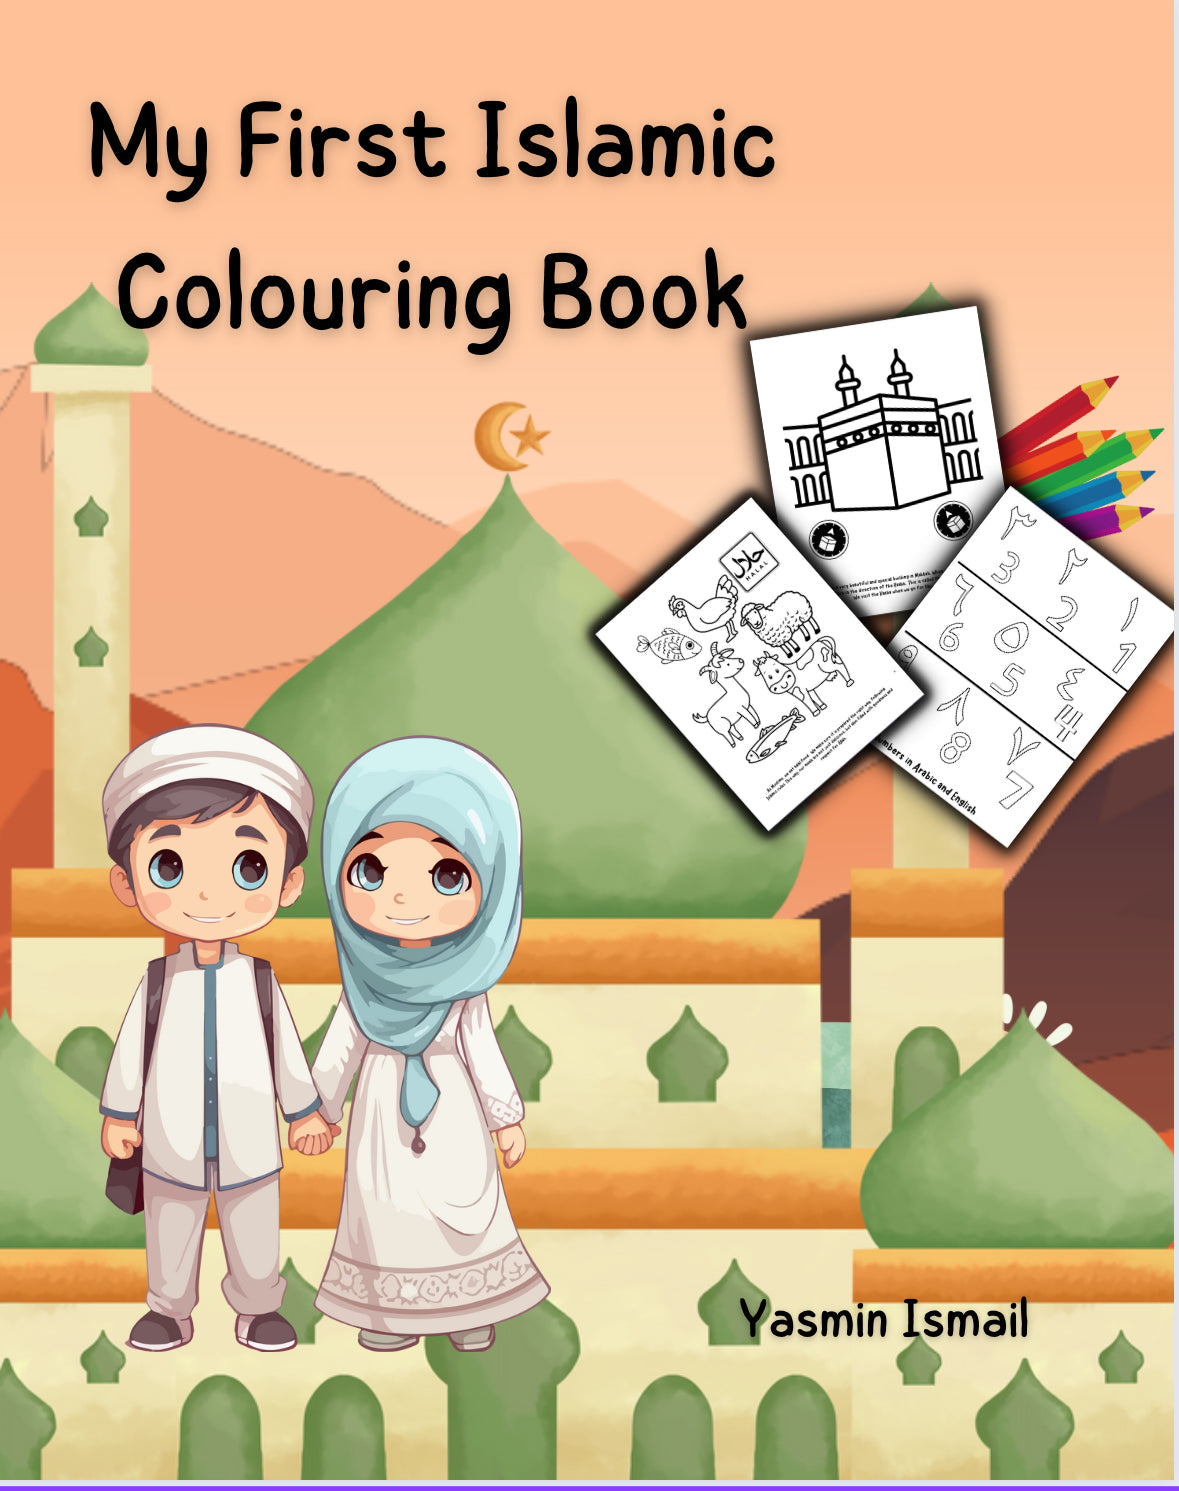 My First Islamic Colouring Book